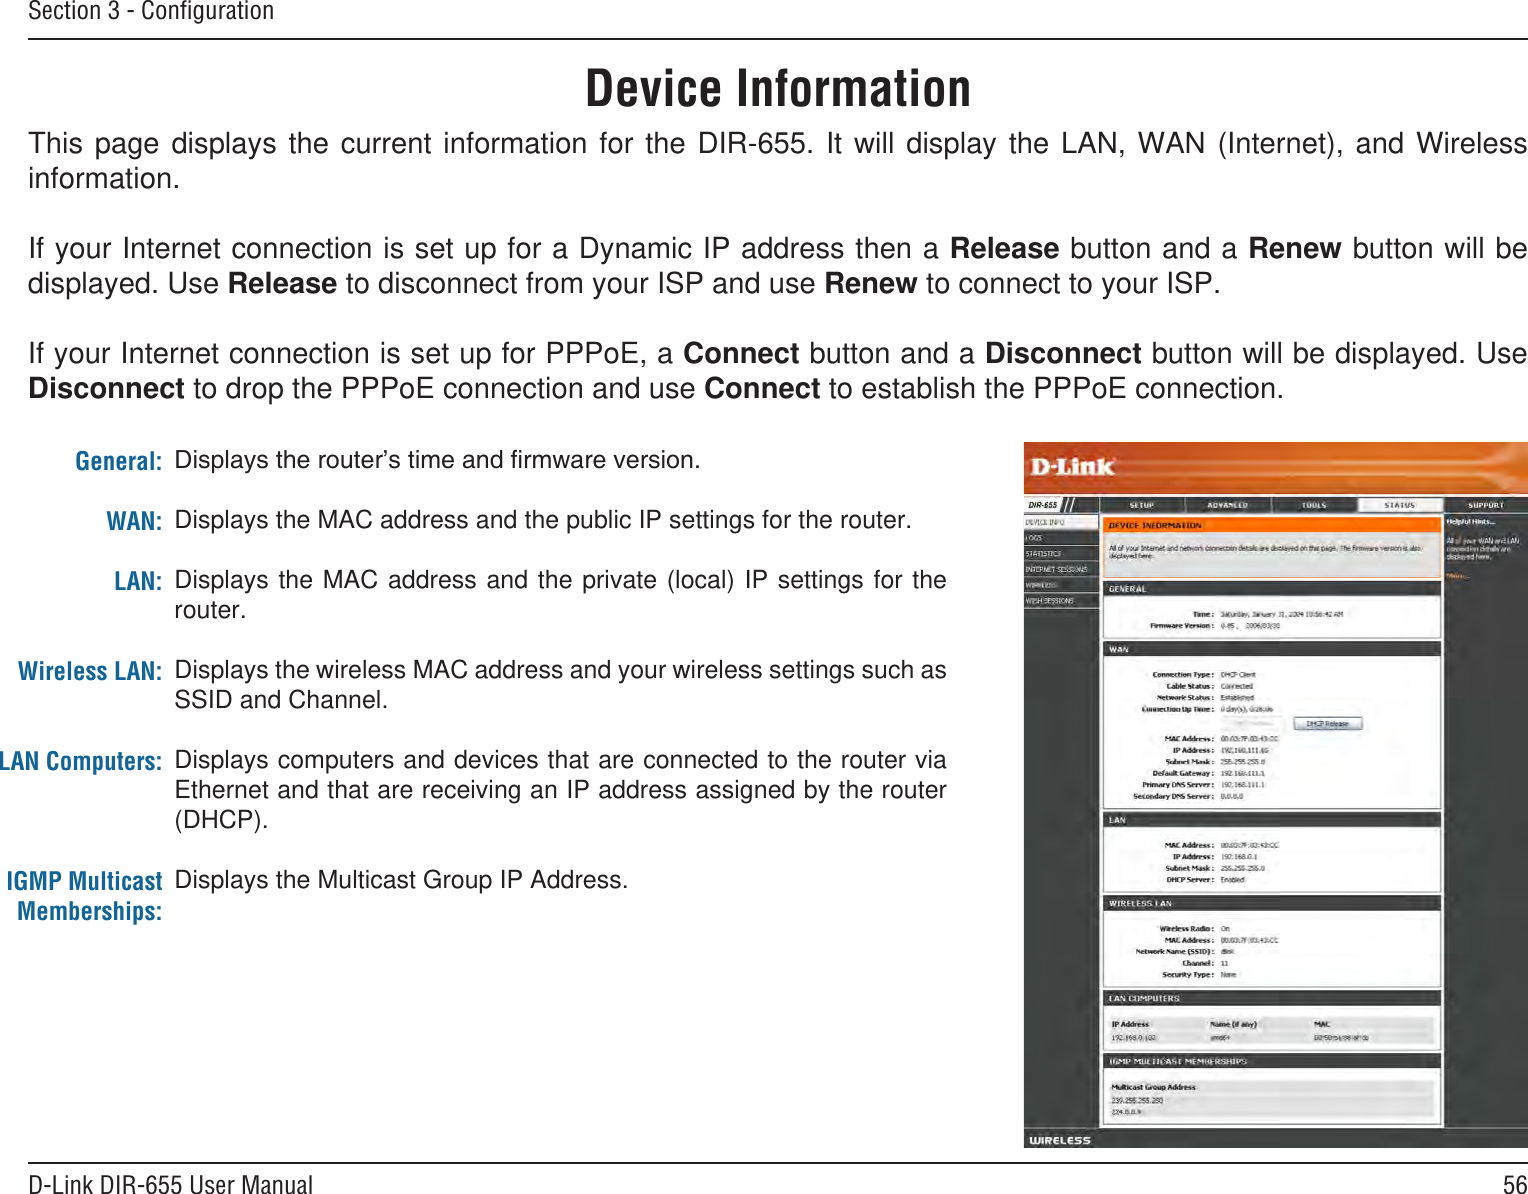 56D-Link DIR-655 User ManualSection 3 - ConﬁgurationThis  page  displays  the  current  information  for  the  DIR-655.  It  will  display  the  LAN,  WAN  (Internet),  and  Wireless information.If your Internet connection is set up for a Dynamic IP address then a Release button and a Renew button will be displayed. Use Release to disconnect from your ISP and use Renew to connect to your ISP. If your Internet connection is set up for PPPoE, a Connect button and a Disconnect button will be displayed. Use Disconnect to drop the PPPoE connection and use Connect to establish the PPPoE connection.Displays the MAC address and the public IP settings for the router.Displays the MAC address and the private (local) IP settings for the router.Displays the wireless MAC address and your wireless settings such as SSID and Channel.Displays computers and devices that are connected to the router via Ethernet and that are receiving an IP address assigned by the router (DHCP). Displays the Multicast Group IP Address.General:WAN:LAN:Wireless LAN:LAN Computers:IGMP Multicast Memberships:Device Information